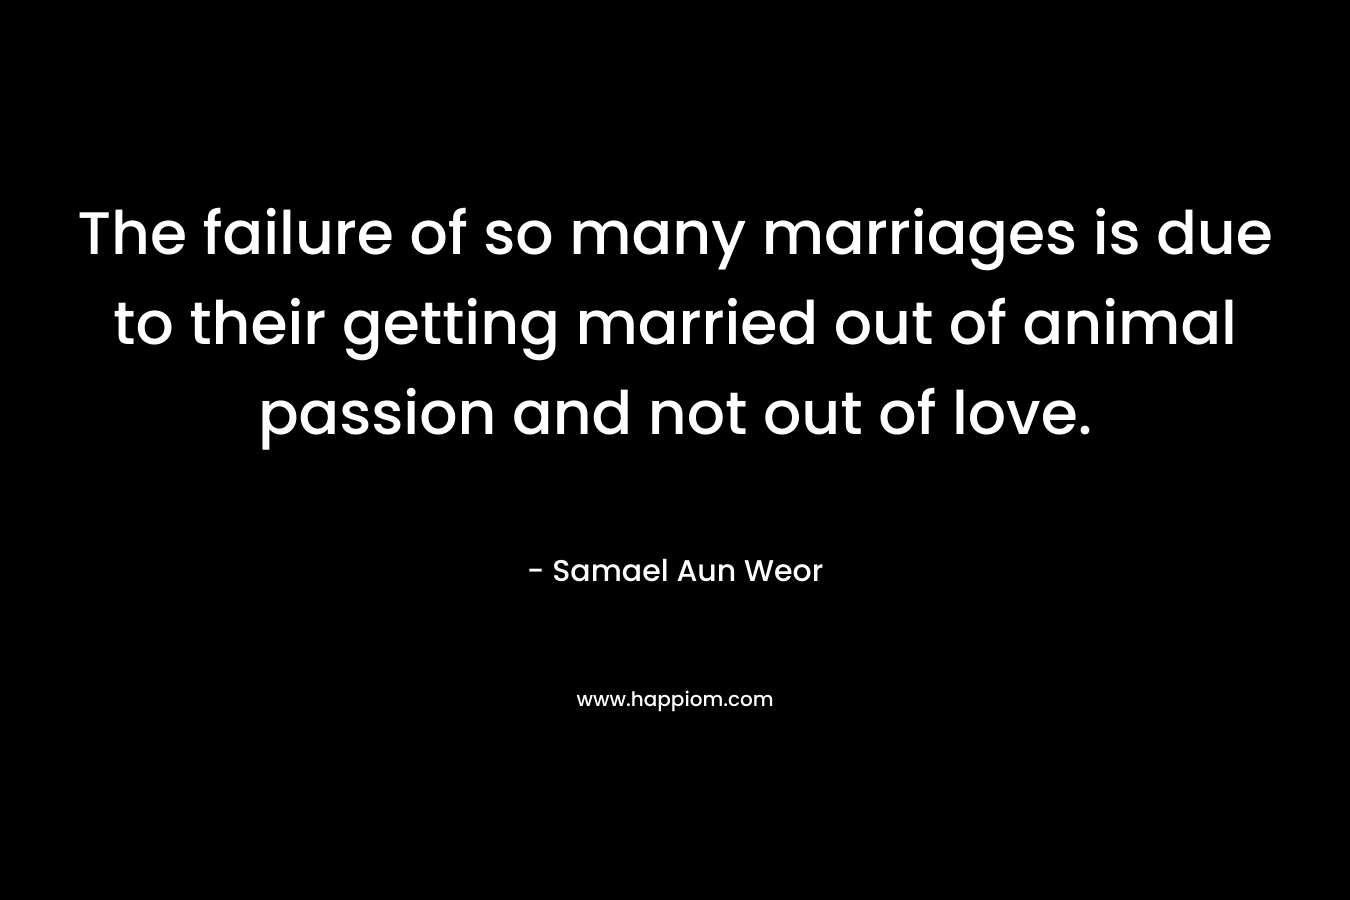 The failure of so many marriages is due to their getting married out of animal passion and not out of love. – Samael Aun Weor